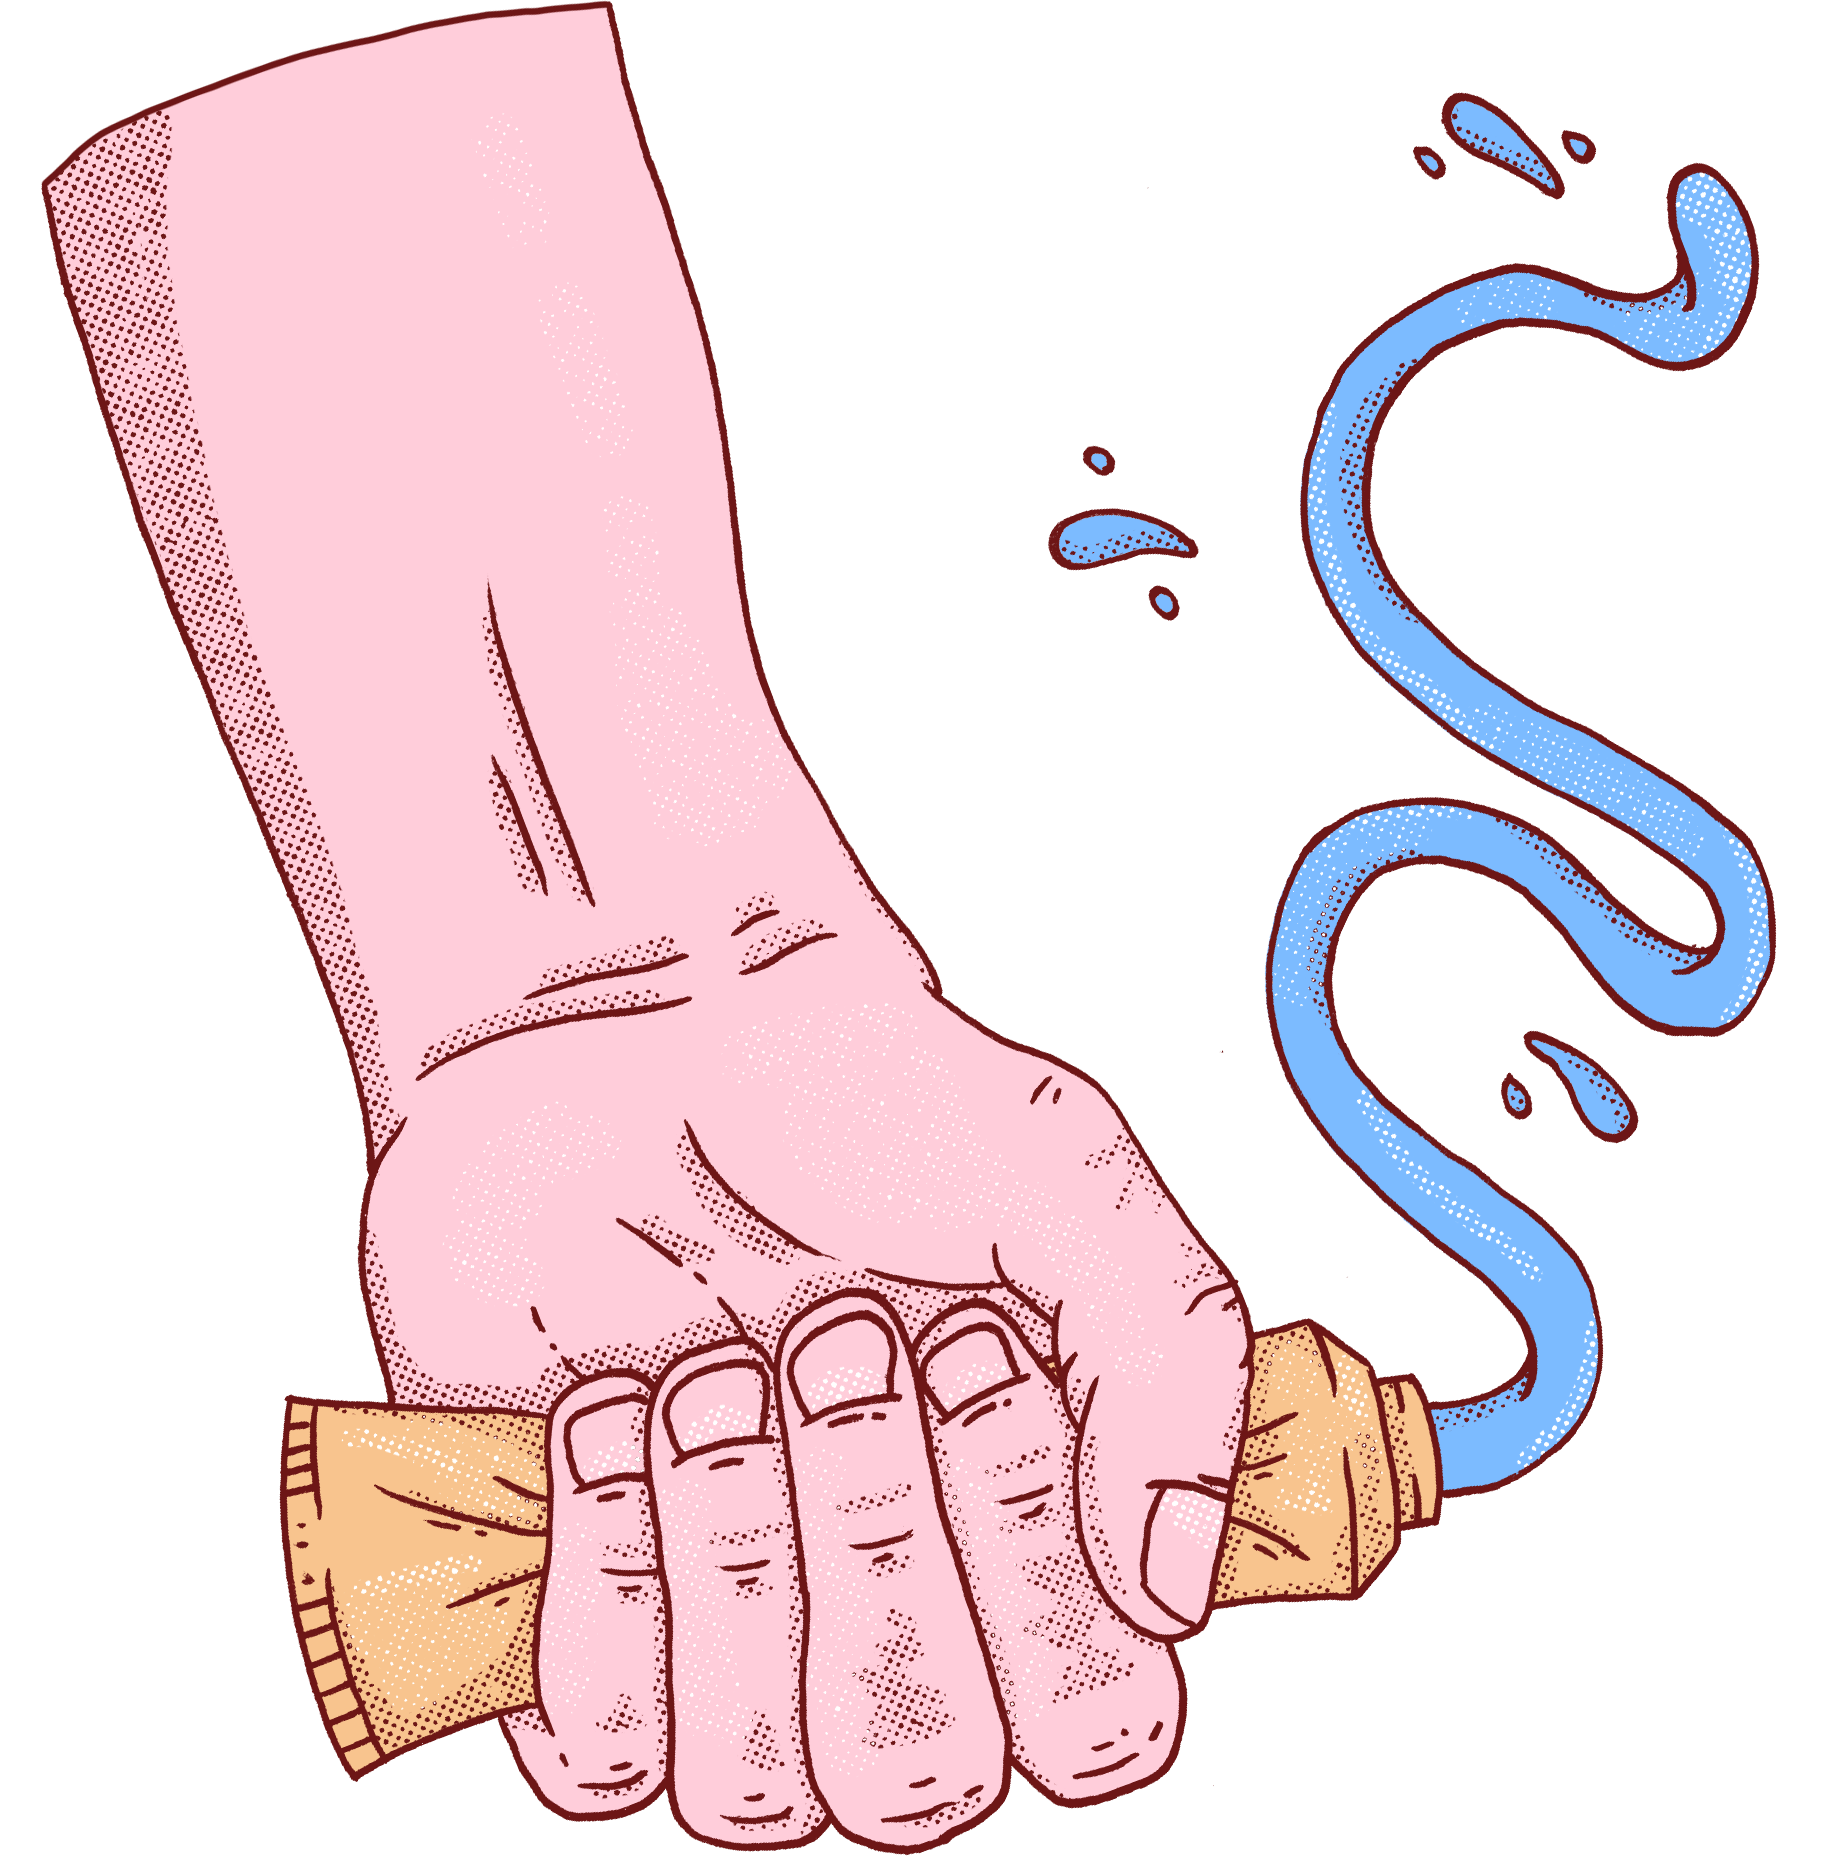 Illustration of a hand holding a phone with a question mark